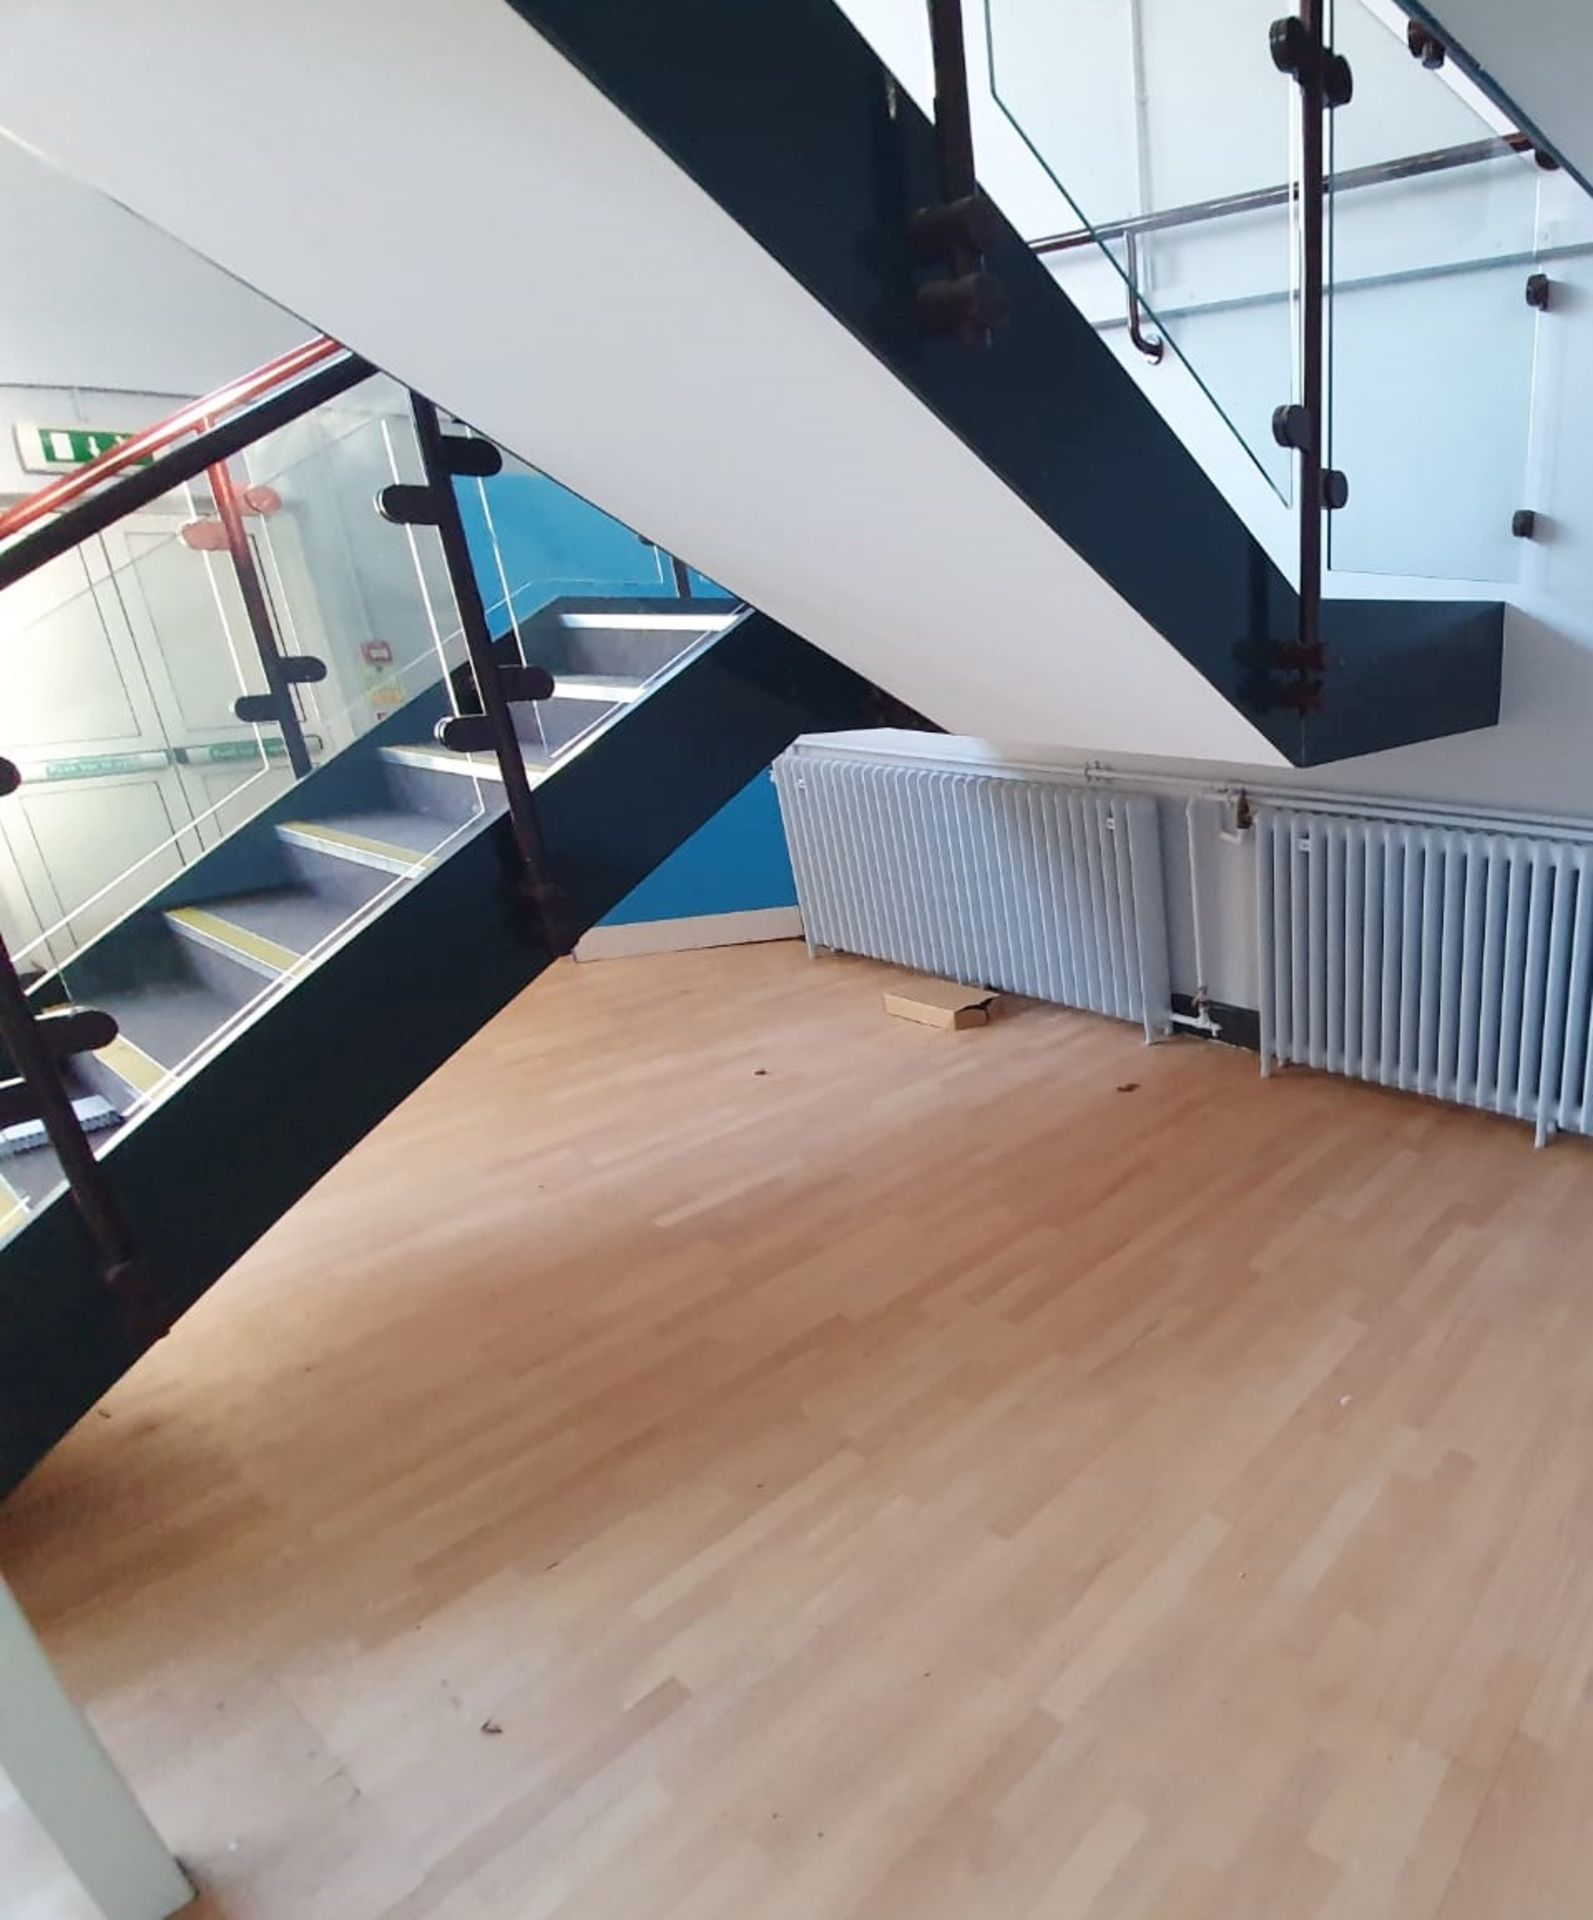 1 x Mezzanine Floor With Two Sets of Floating Stairs and Glazed Safety Panels With Hand Rails - From - Image 15 of 18